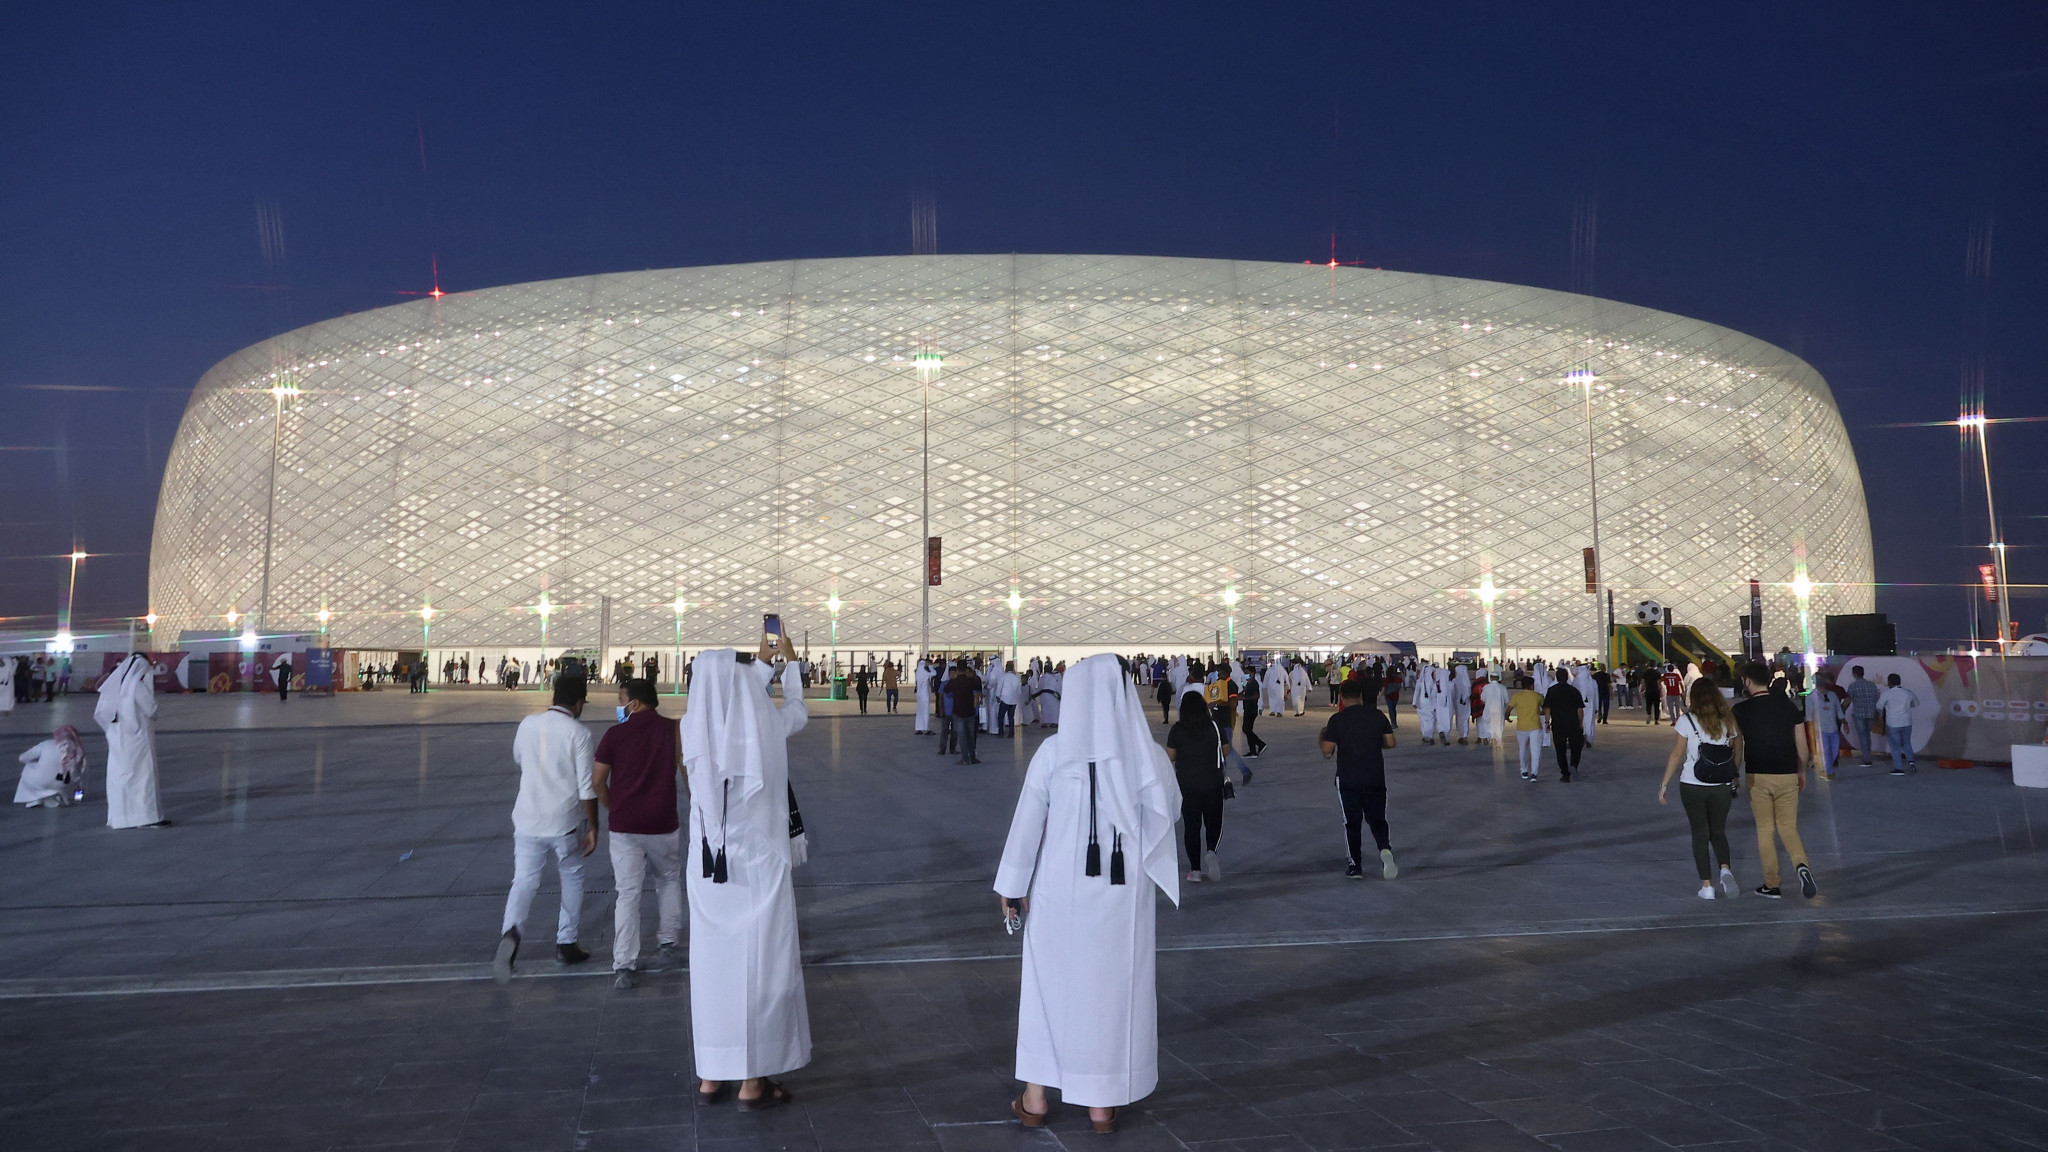 The Al Thumama Stadium is expected to stage the first game of the 2022 FIFA World Cup on November 21 ©Getty Images